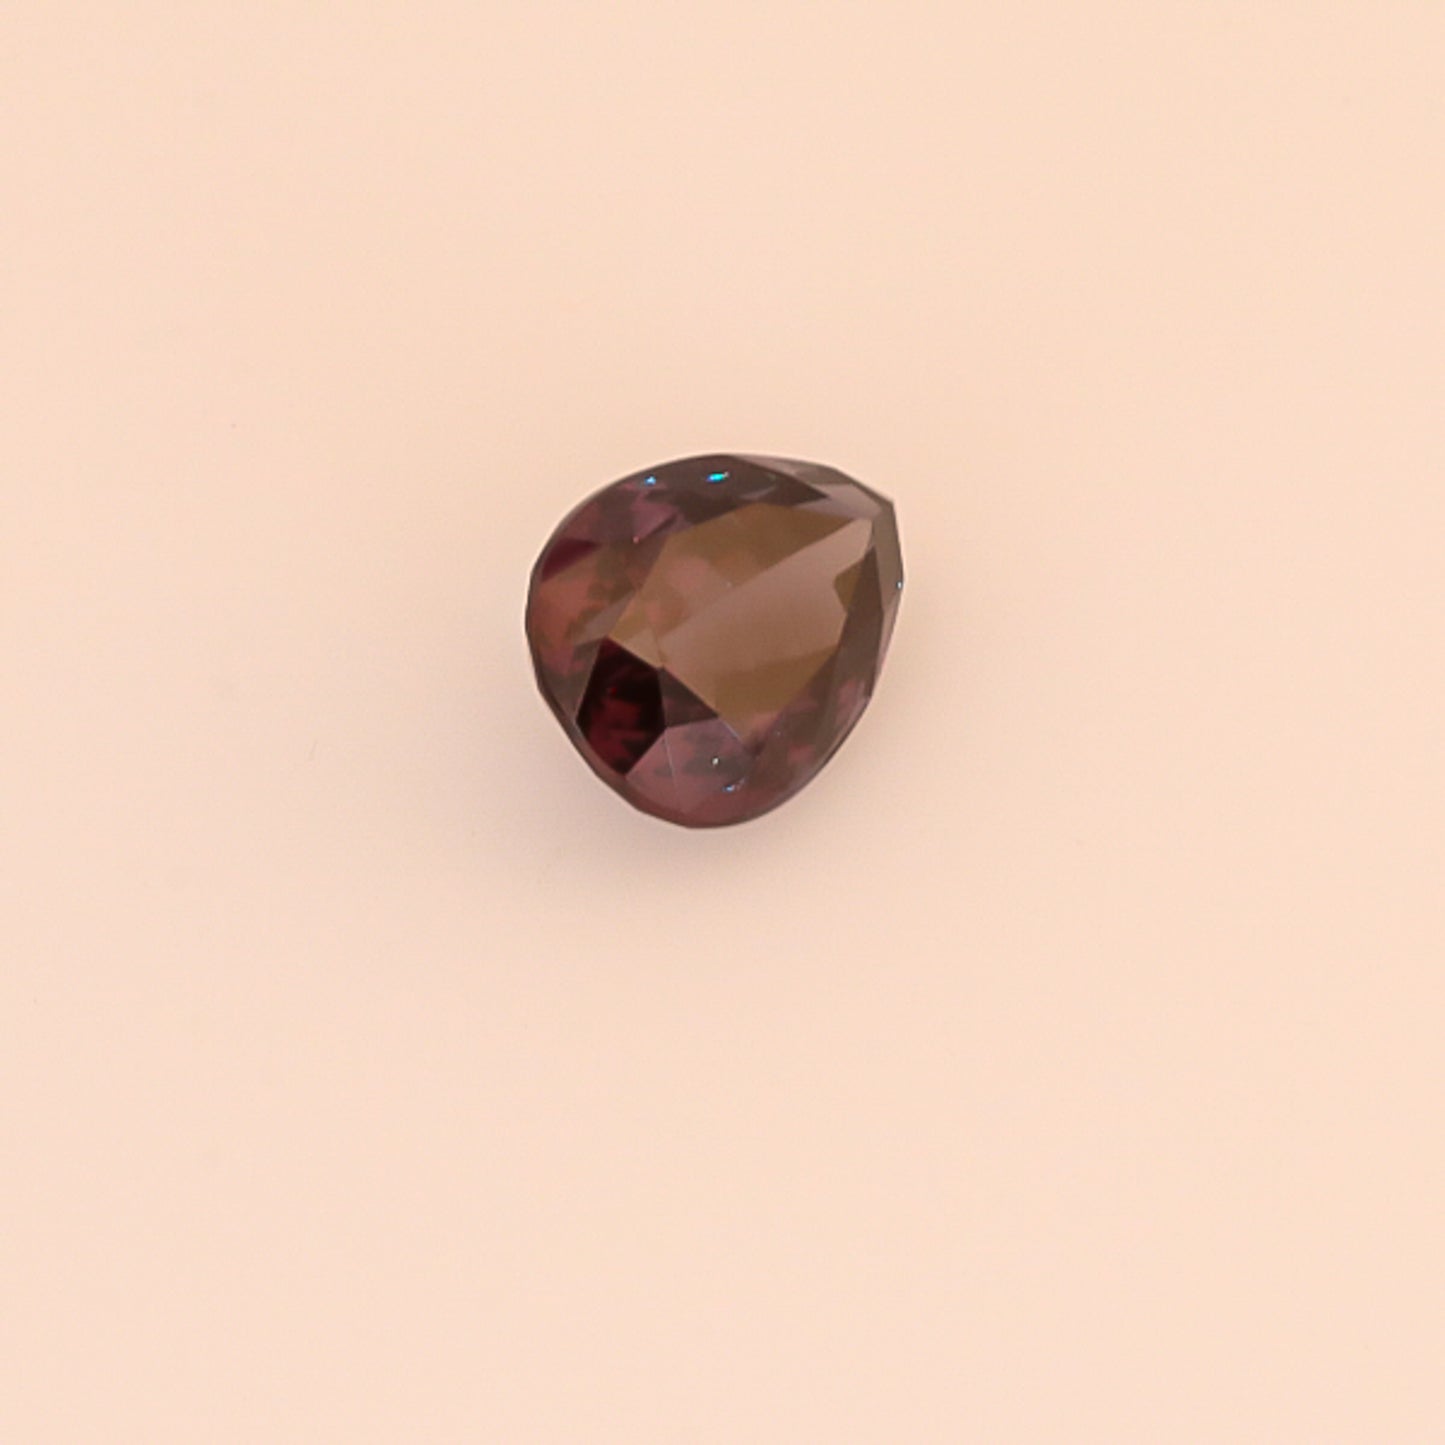 Load image into Gallery viewer, Natural Color Change Garnet 3.92 Carats
